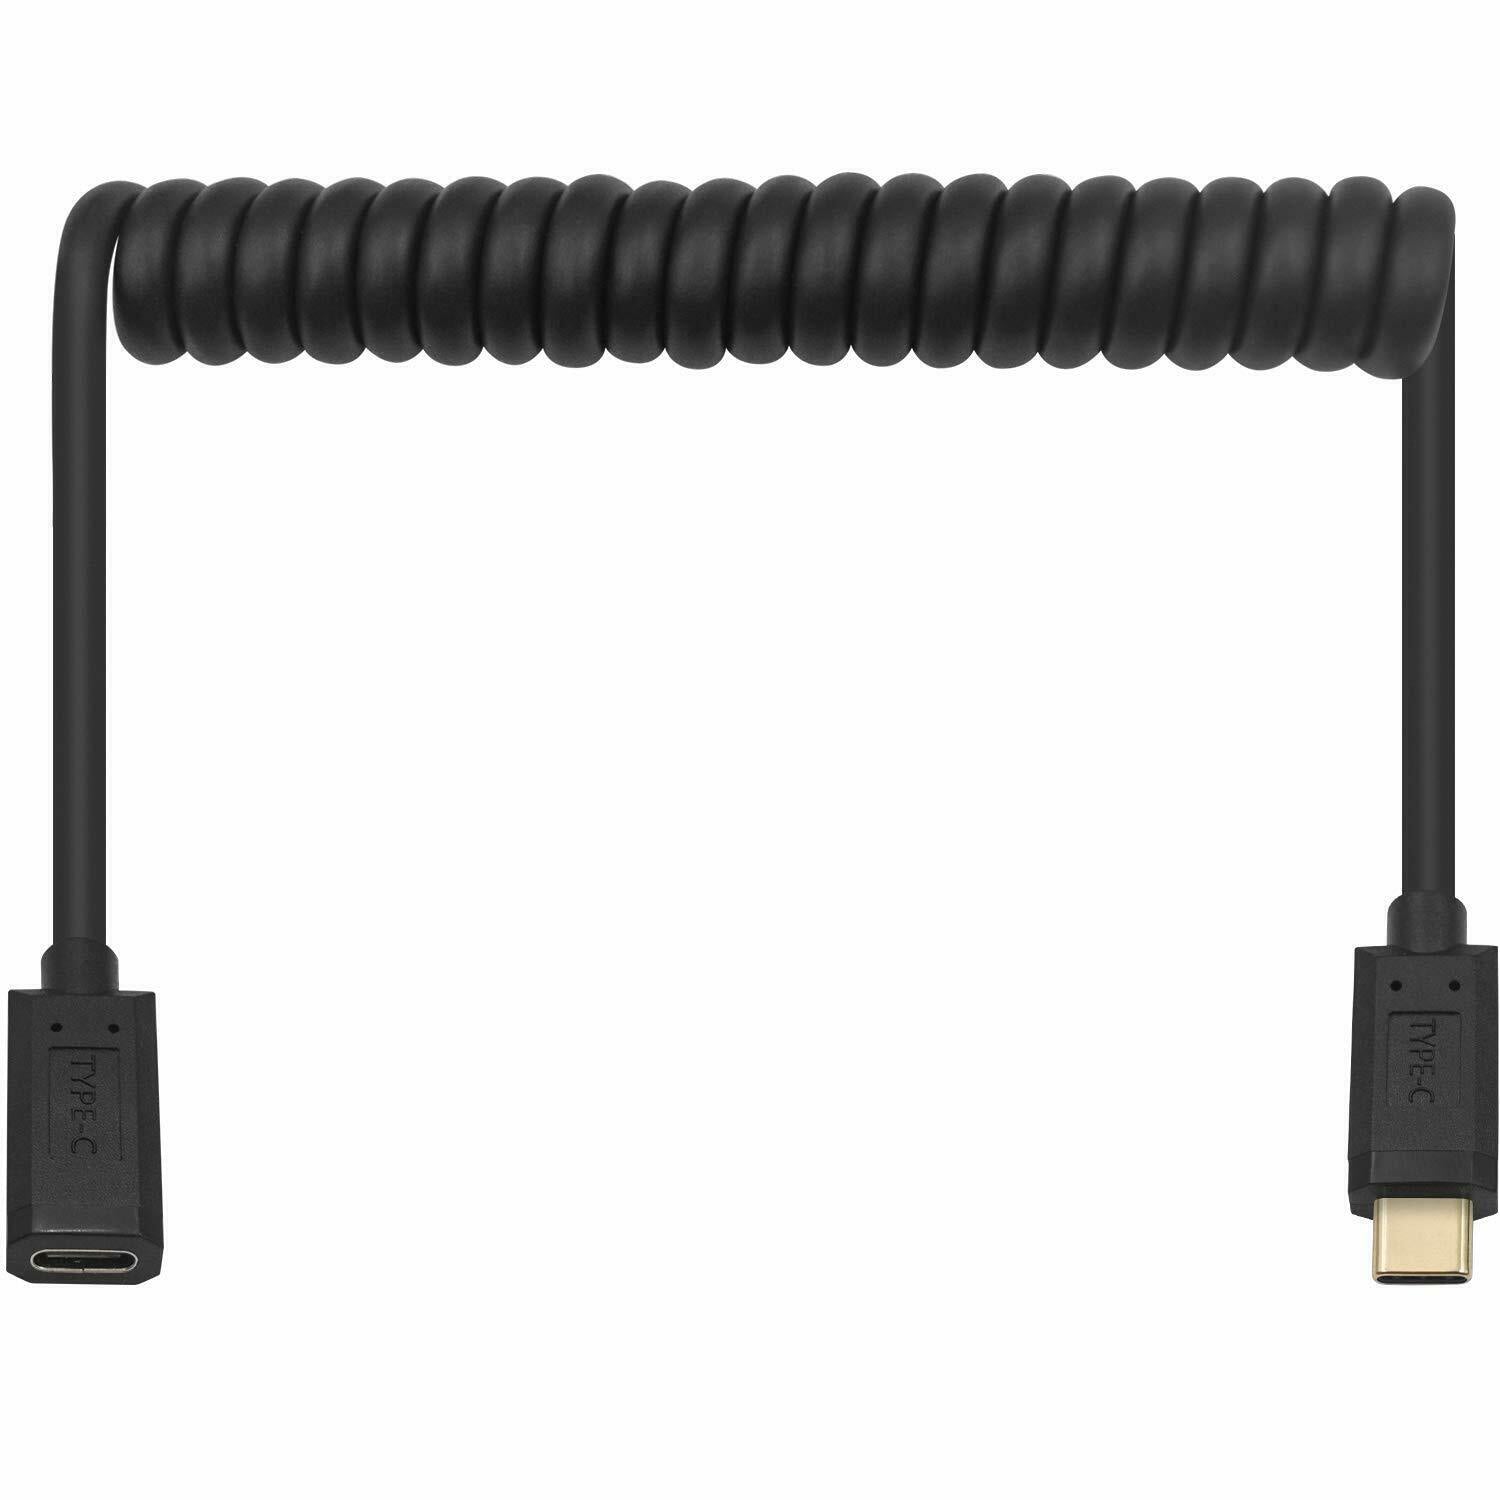 USB-C Male to Female Charge Sync Coiled Extension Cable